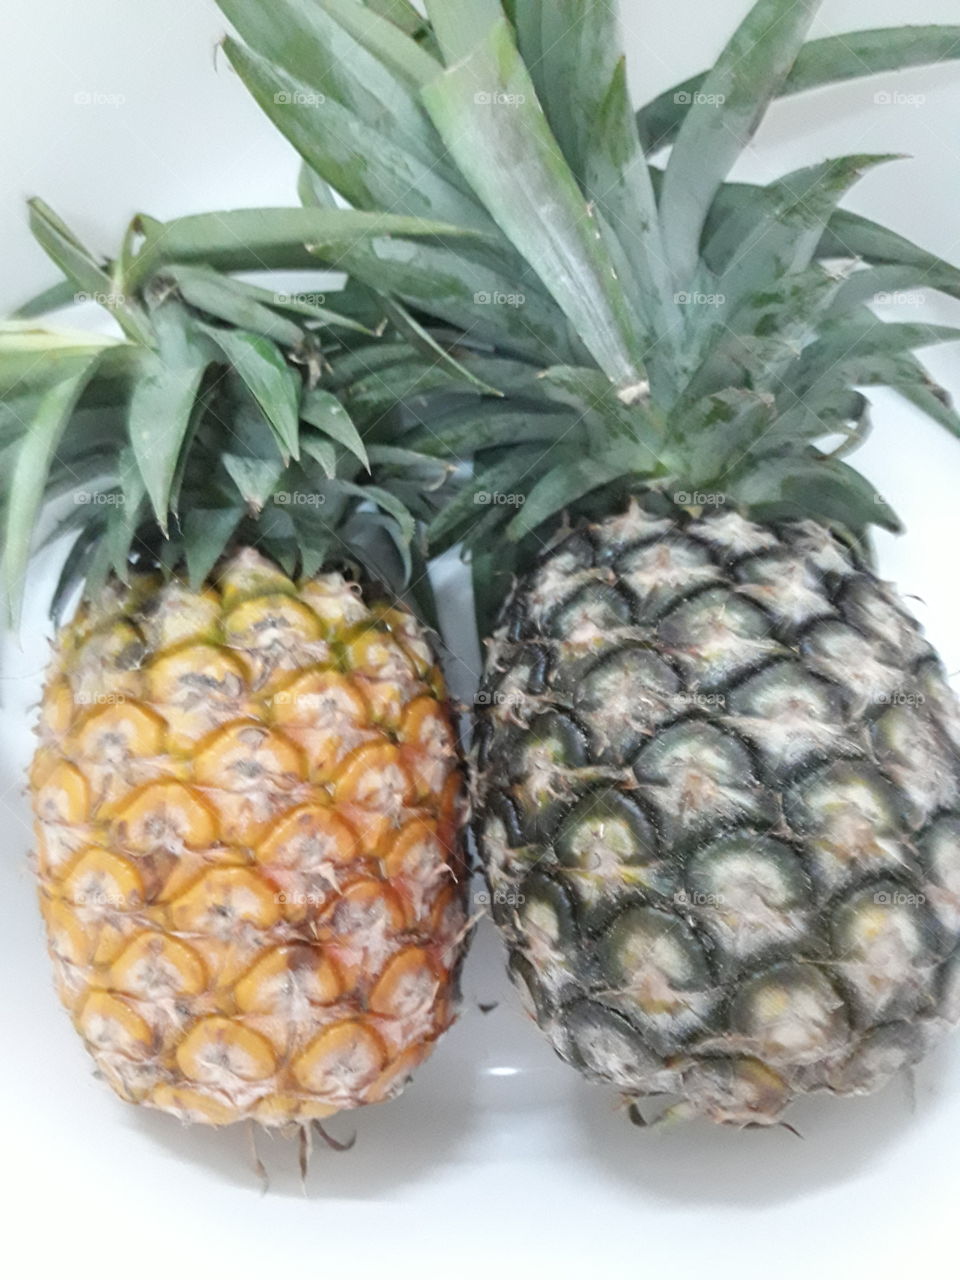 two pineapples, the left one is ripe and its color will change from green color which is the right one to yellow color.